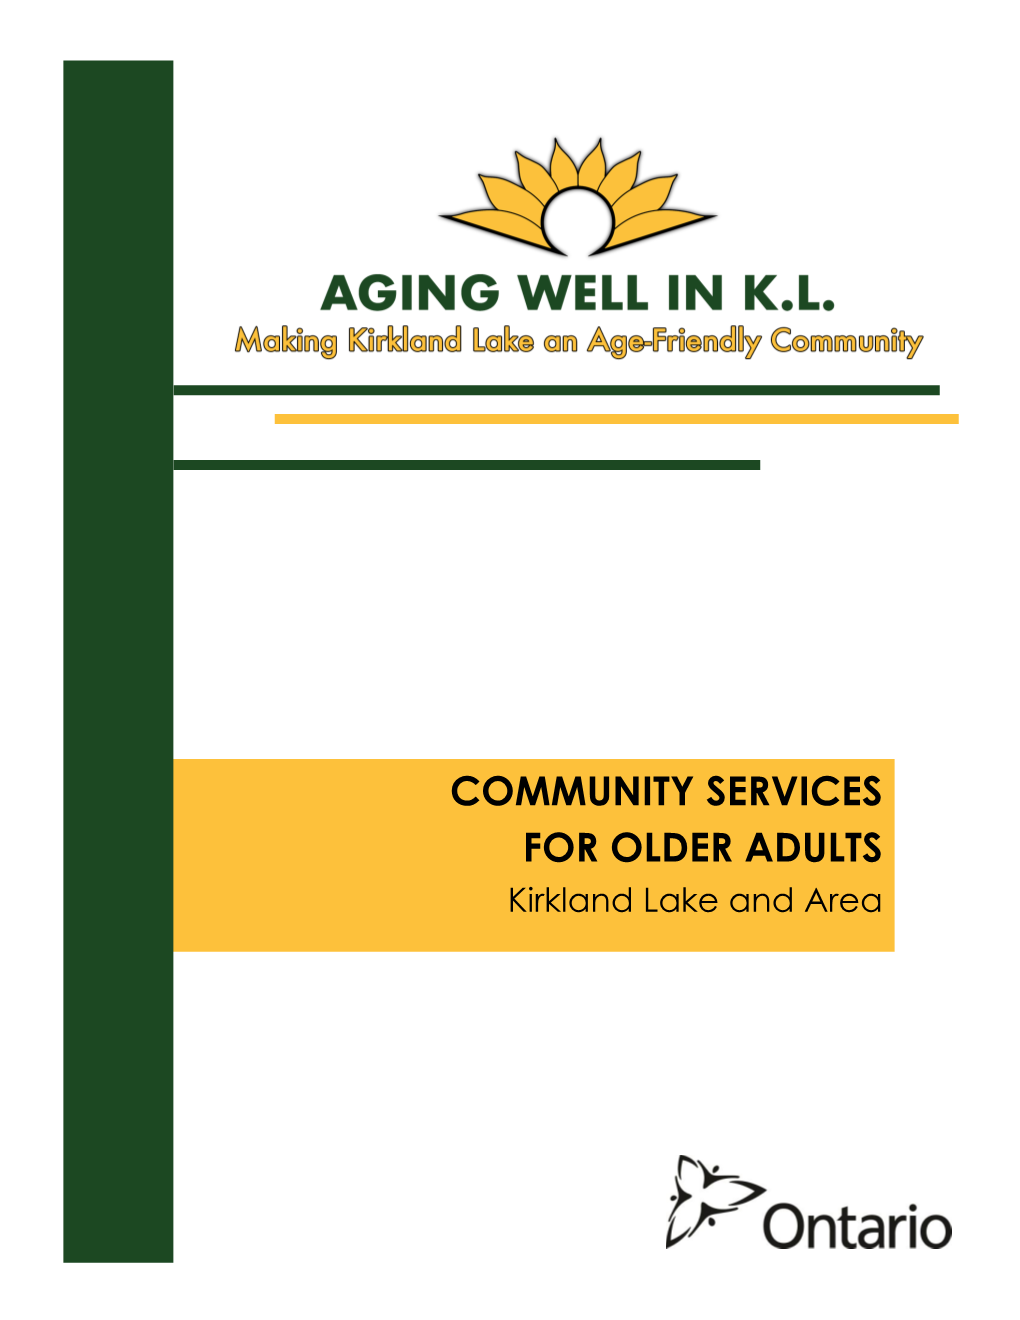 COMMUNITY SERVICES for OLDER ADULTS Kirkland Lake and Area